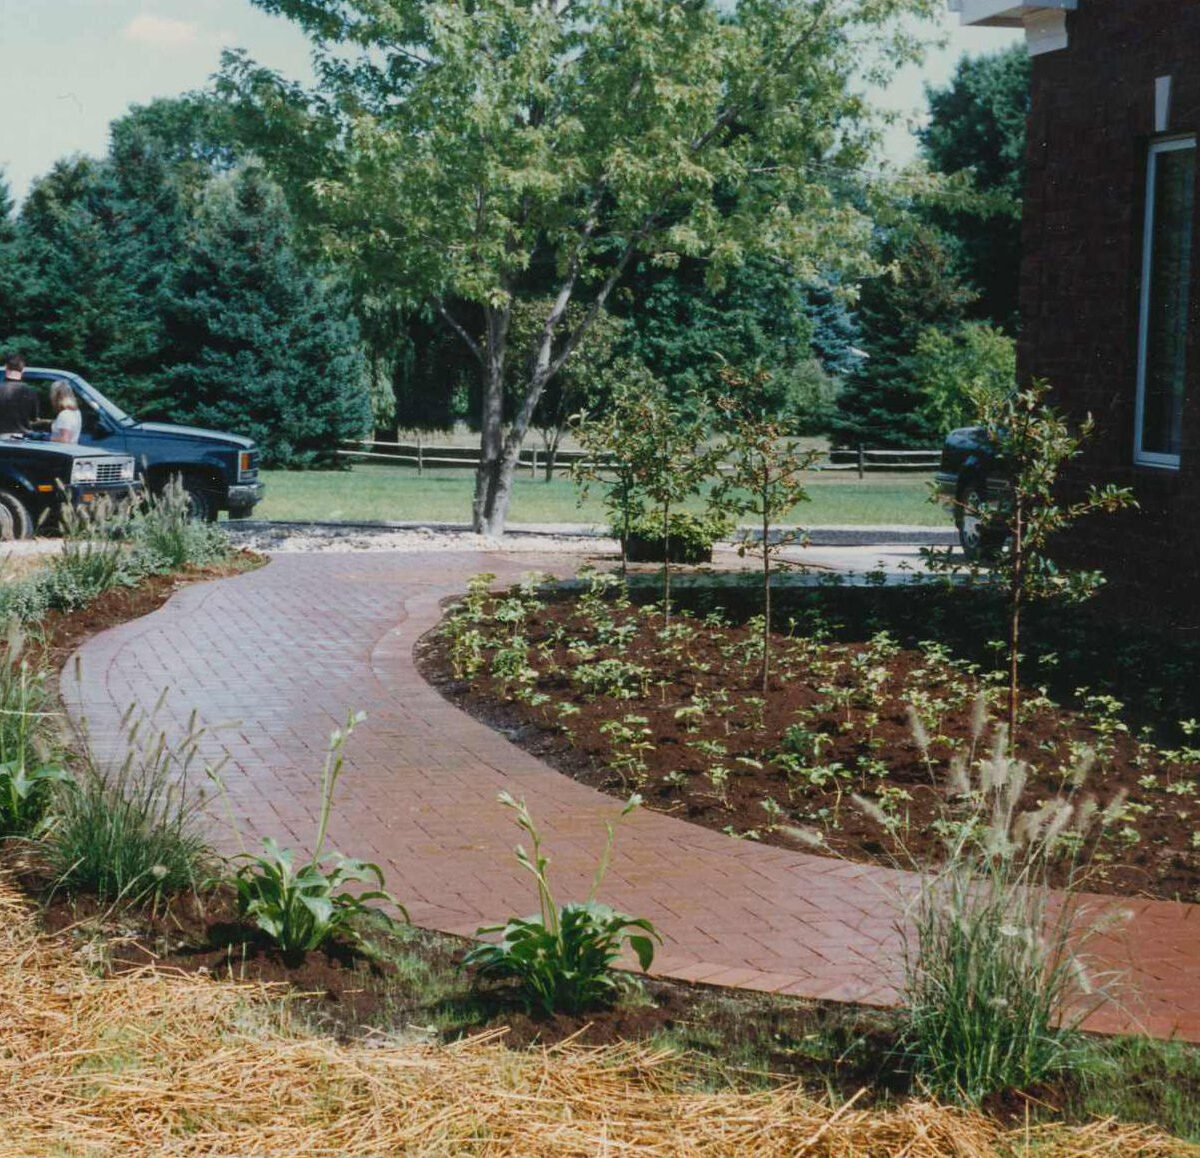 Brick path leading to the entrance of a home